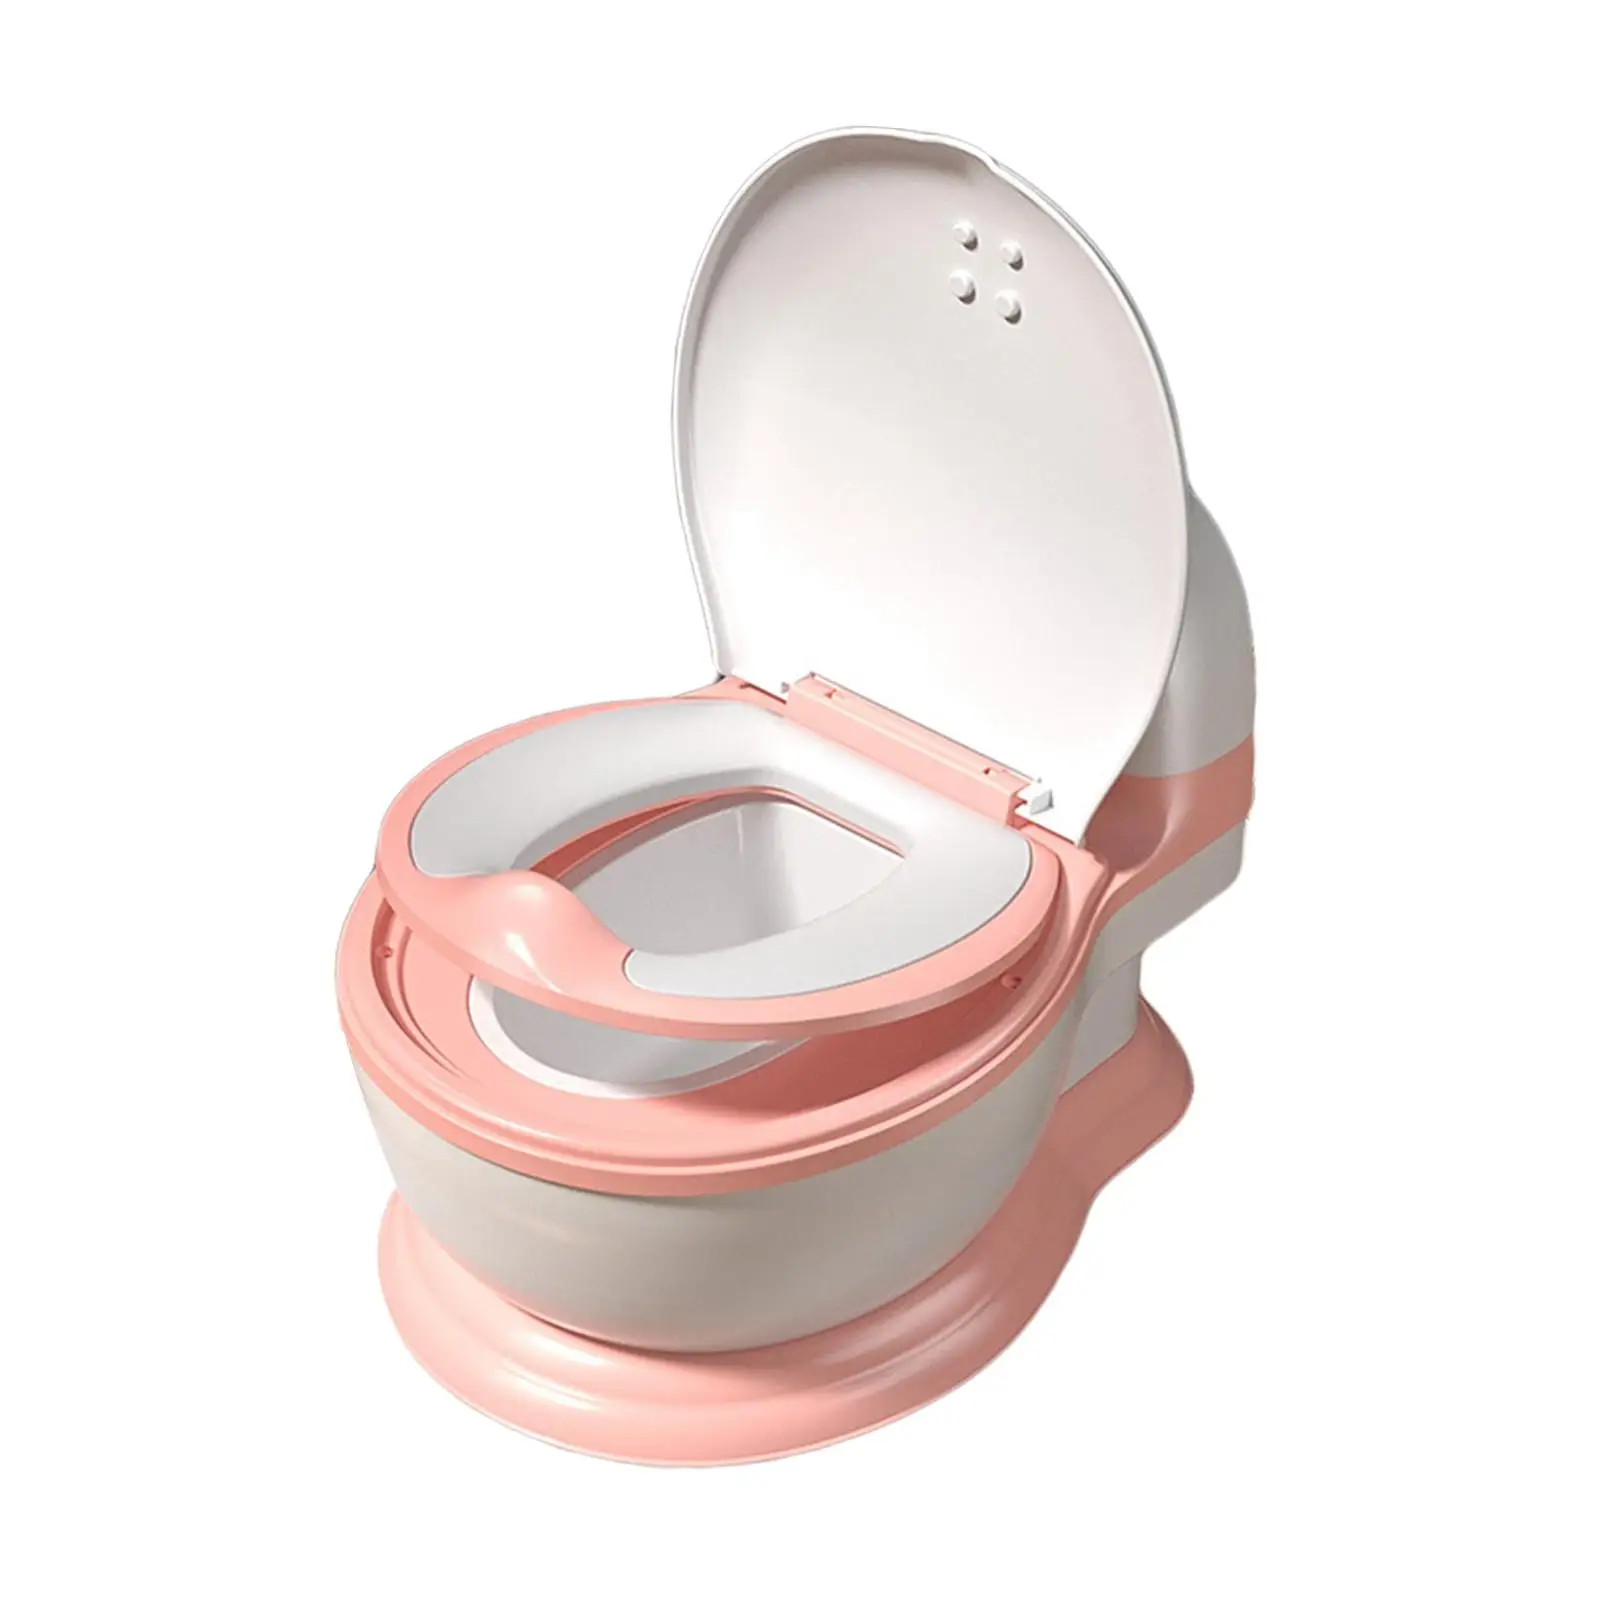 Real Feel Potty Travel Portable with Pad Realistic Potty Seat Potty Train Toilet for Outdoor Hotel Nursery Bedroom Girls